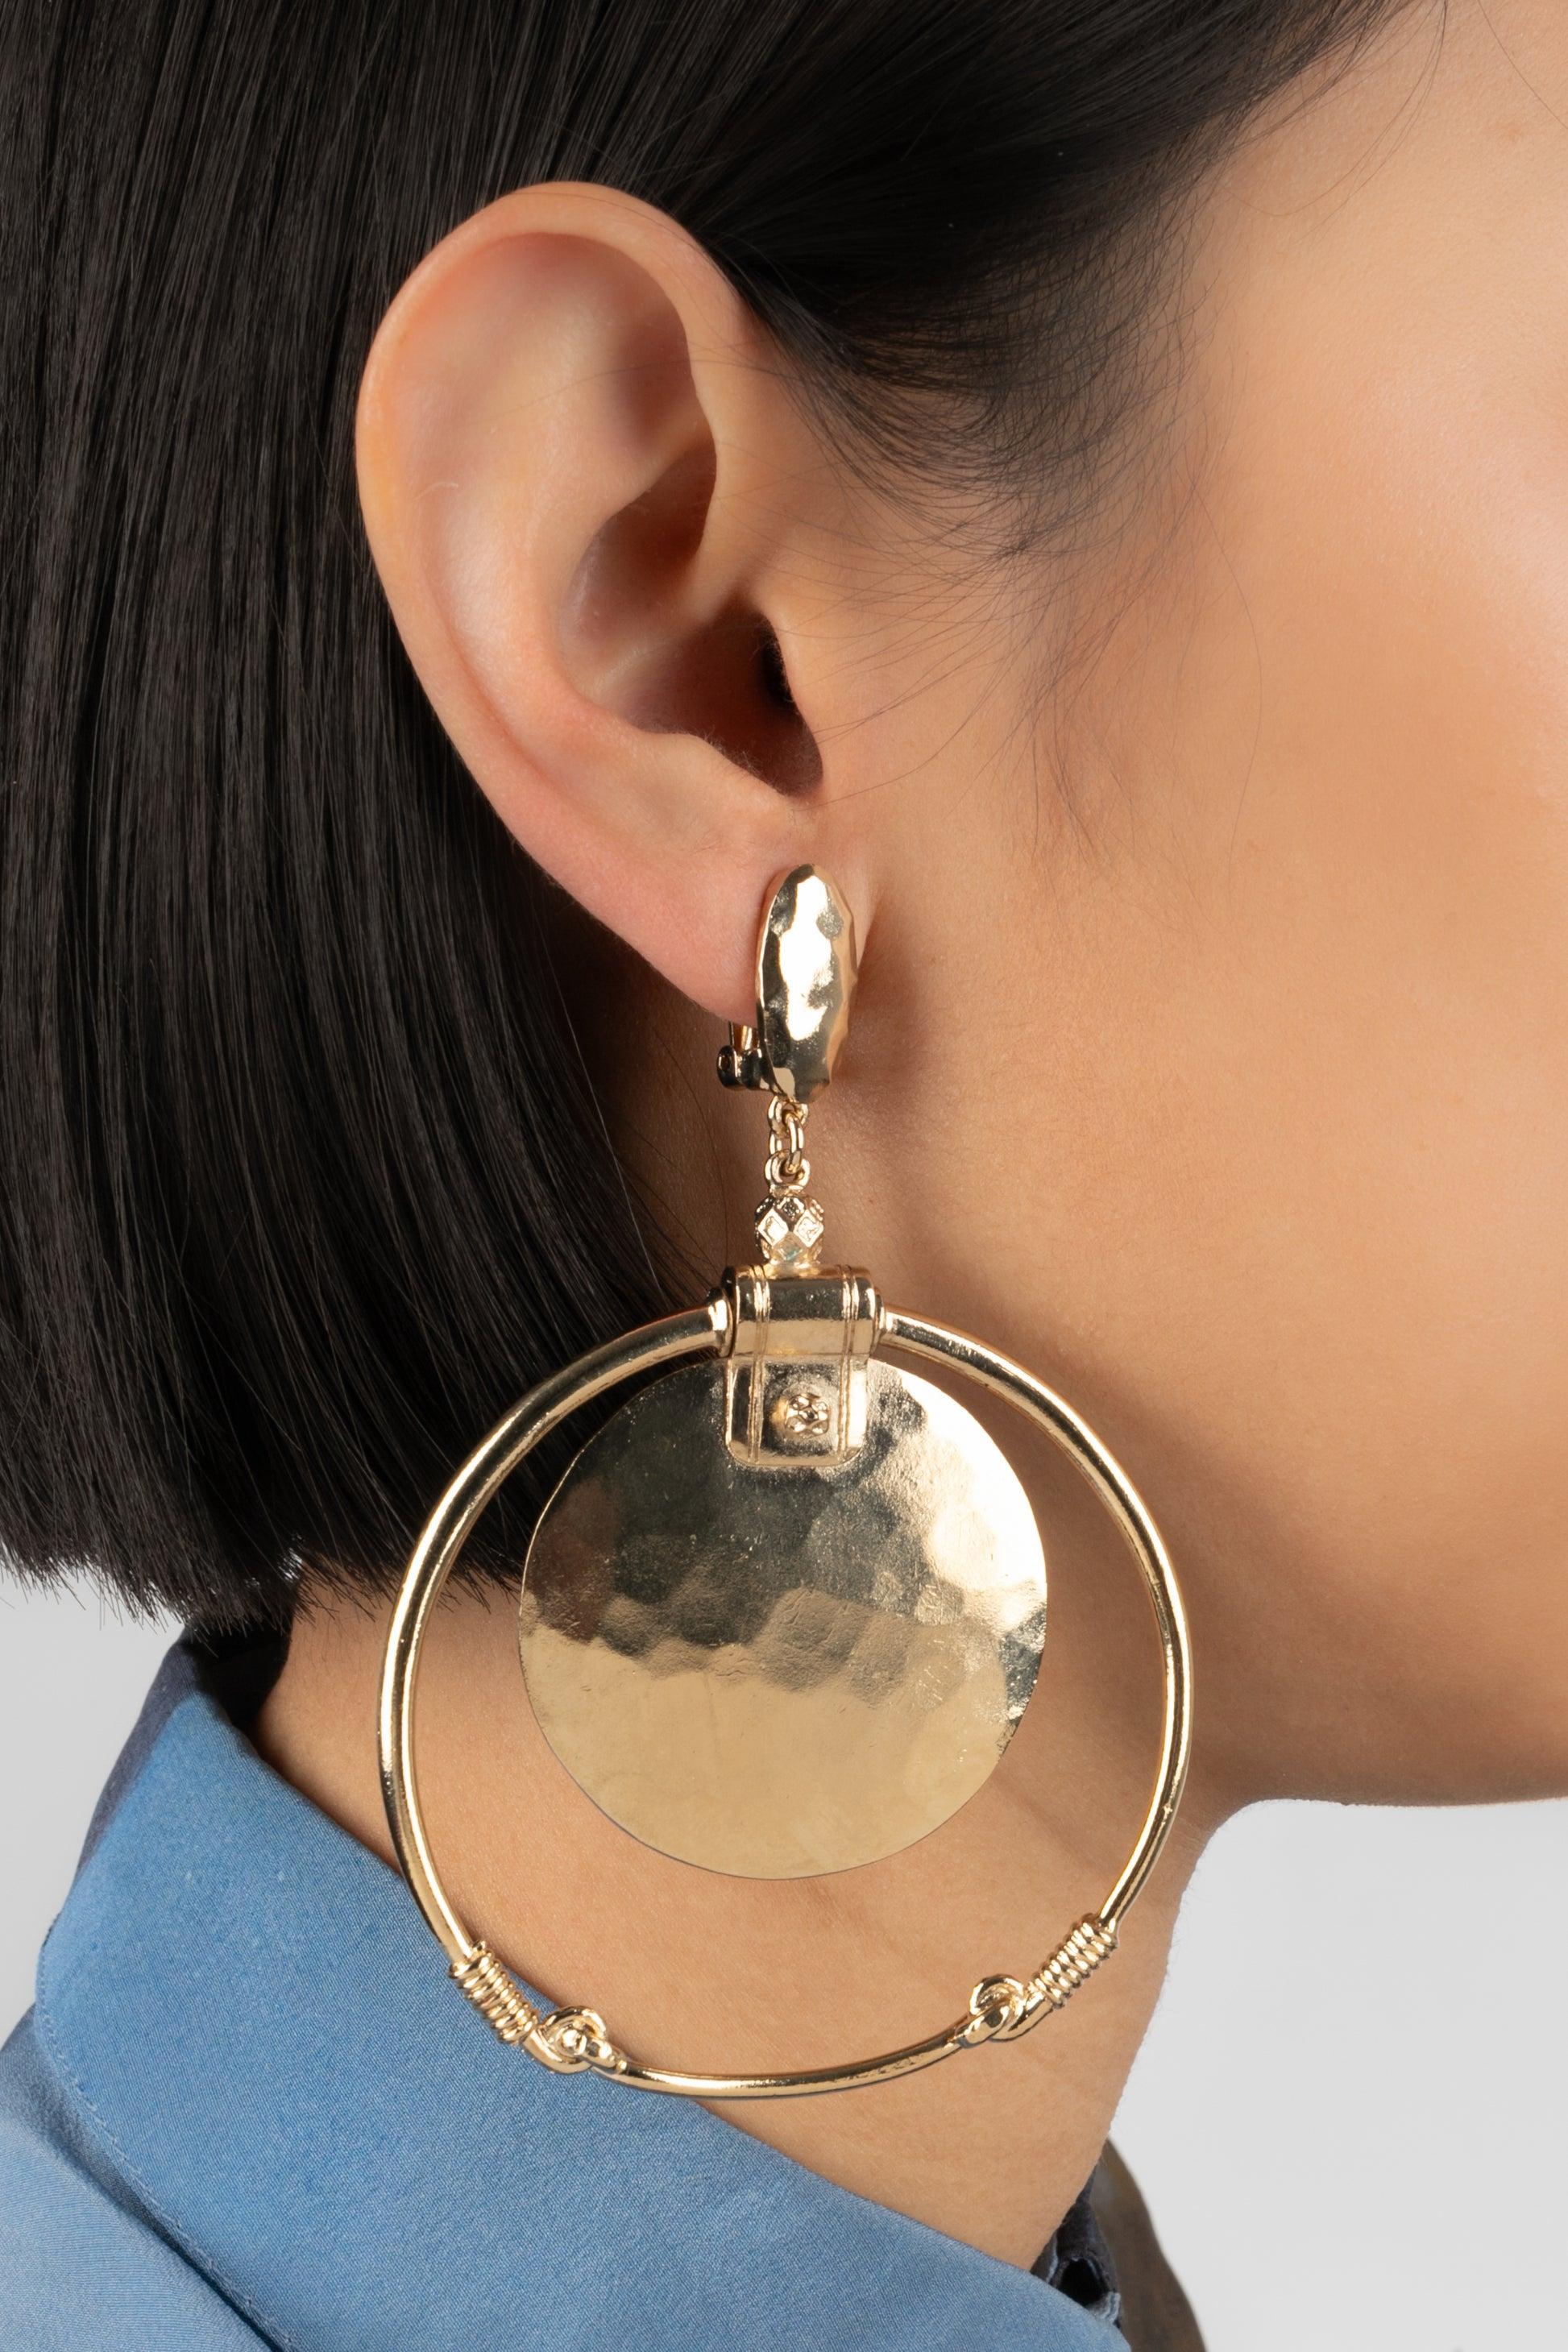 Jean Paul Gaultier - Champagne metal circular earrings.

Additional information:
Condition: Very good condition
Dimensions: Height: 10 cm

Seller Reference: BO71
